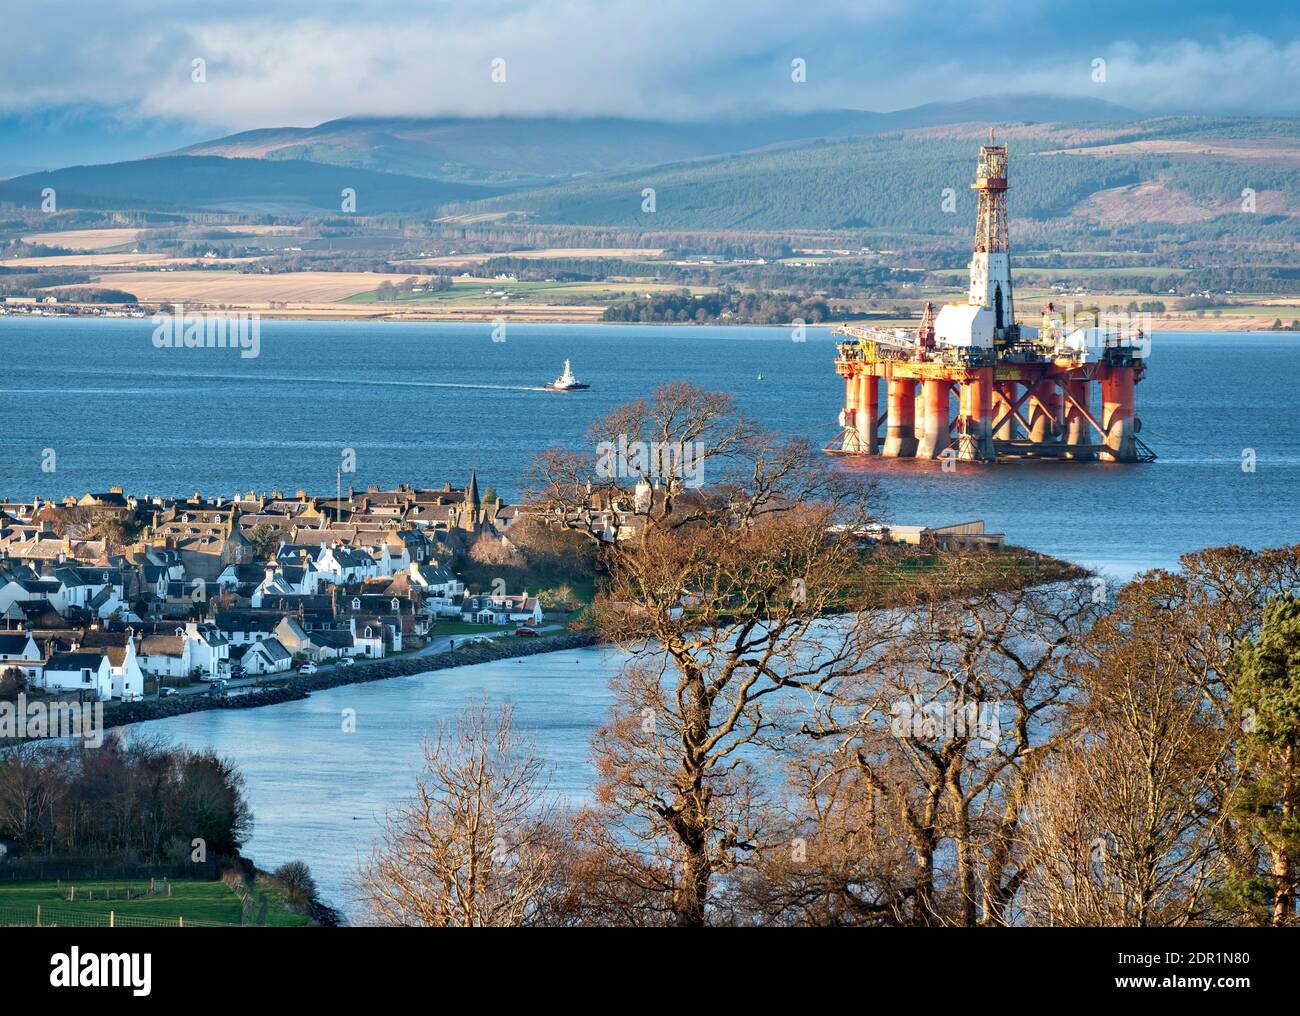 CROMARTY BLACK ISLE PENINSULAR SCOTLAND A VIEW OF VILLAGE THE HOUSES AND THE CROMARTY FIRTH Stock Photo